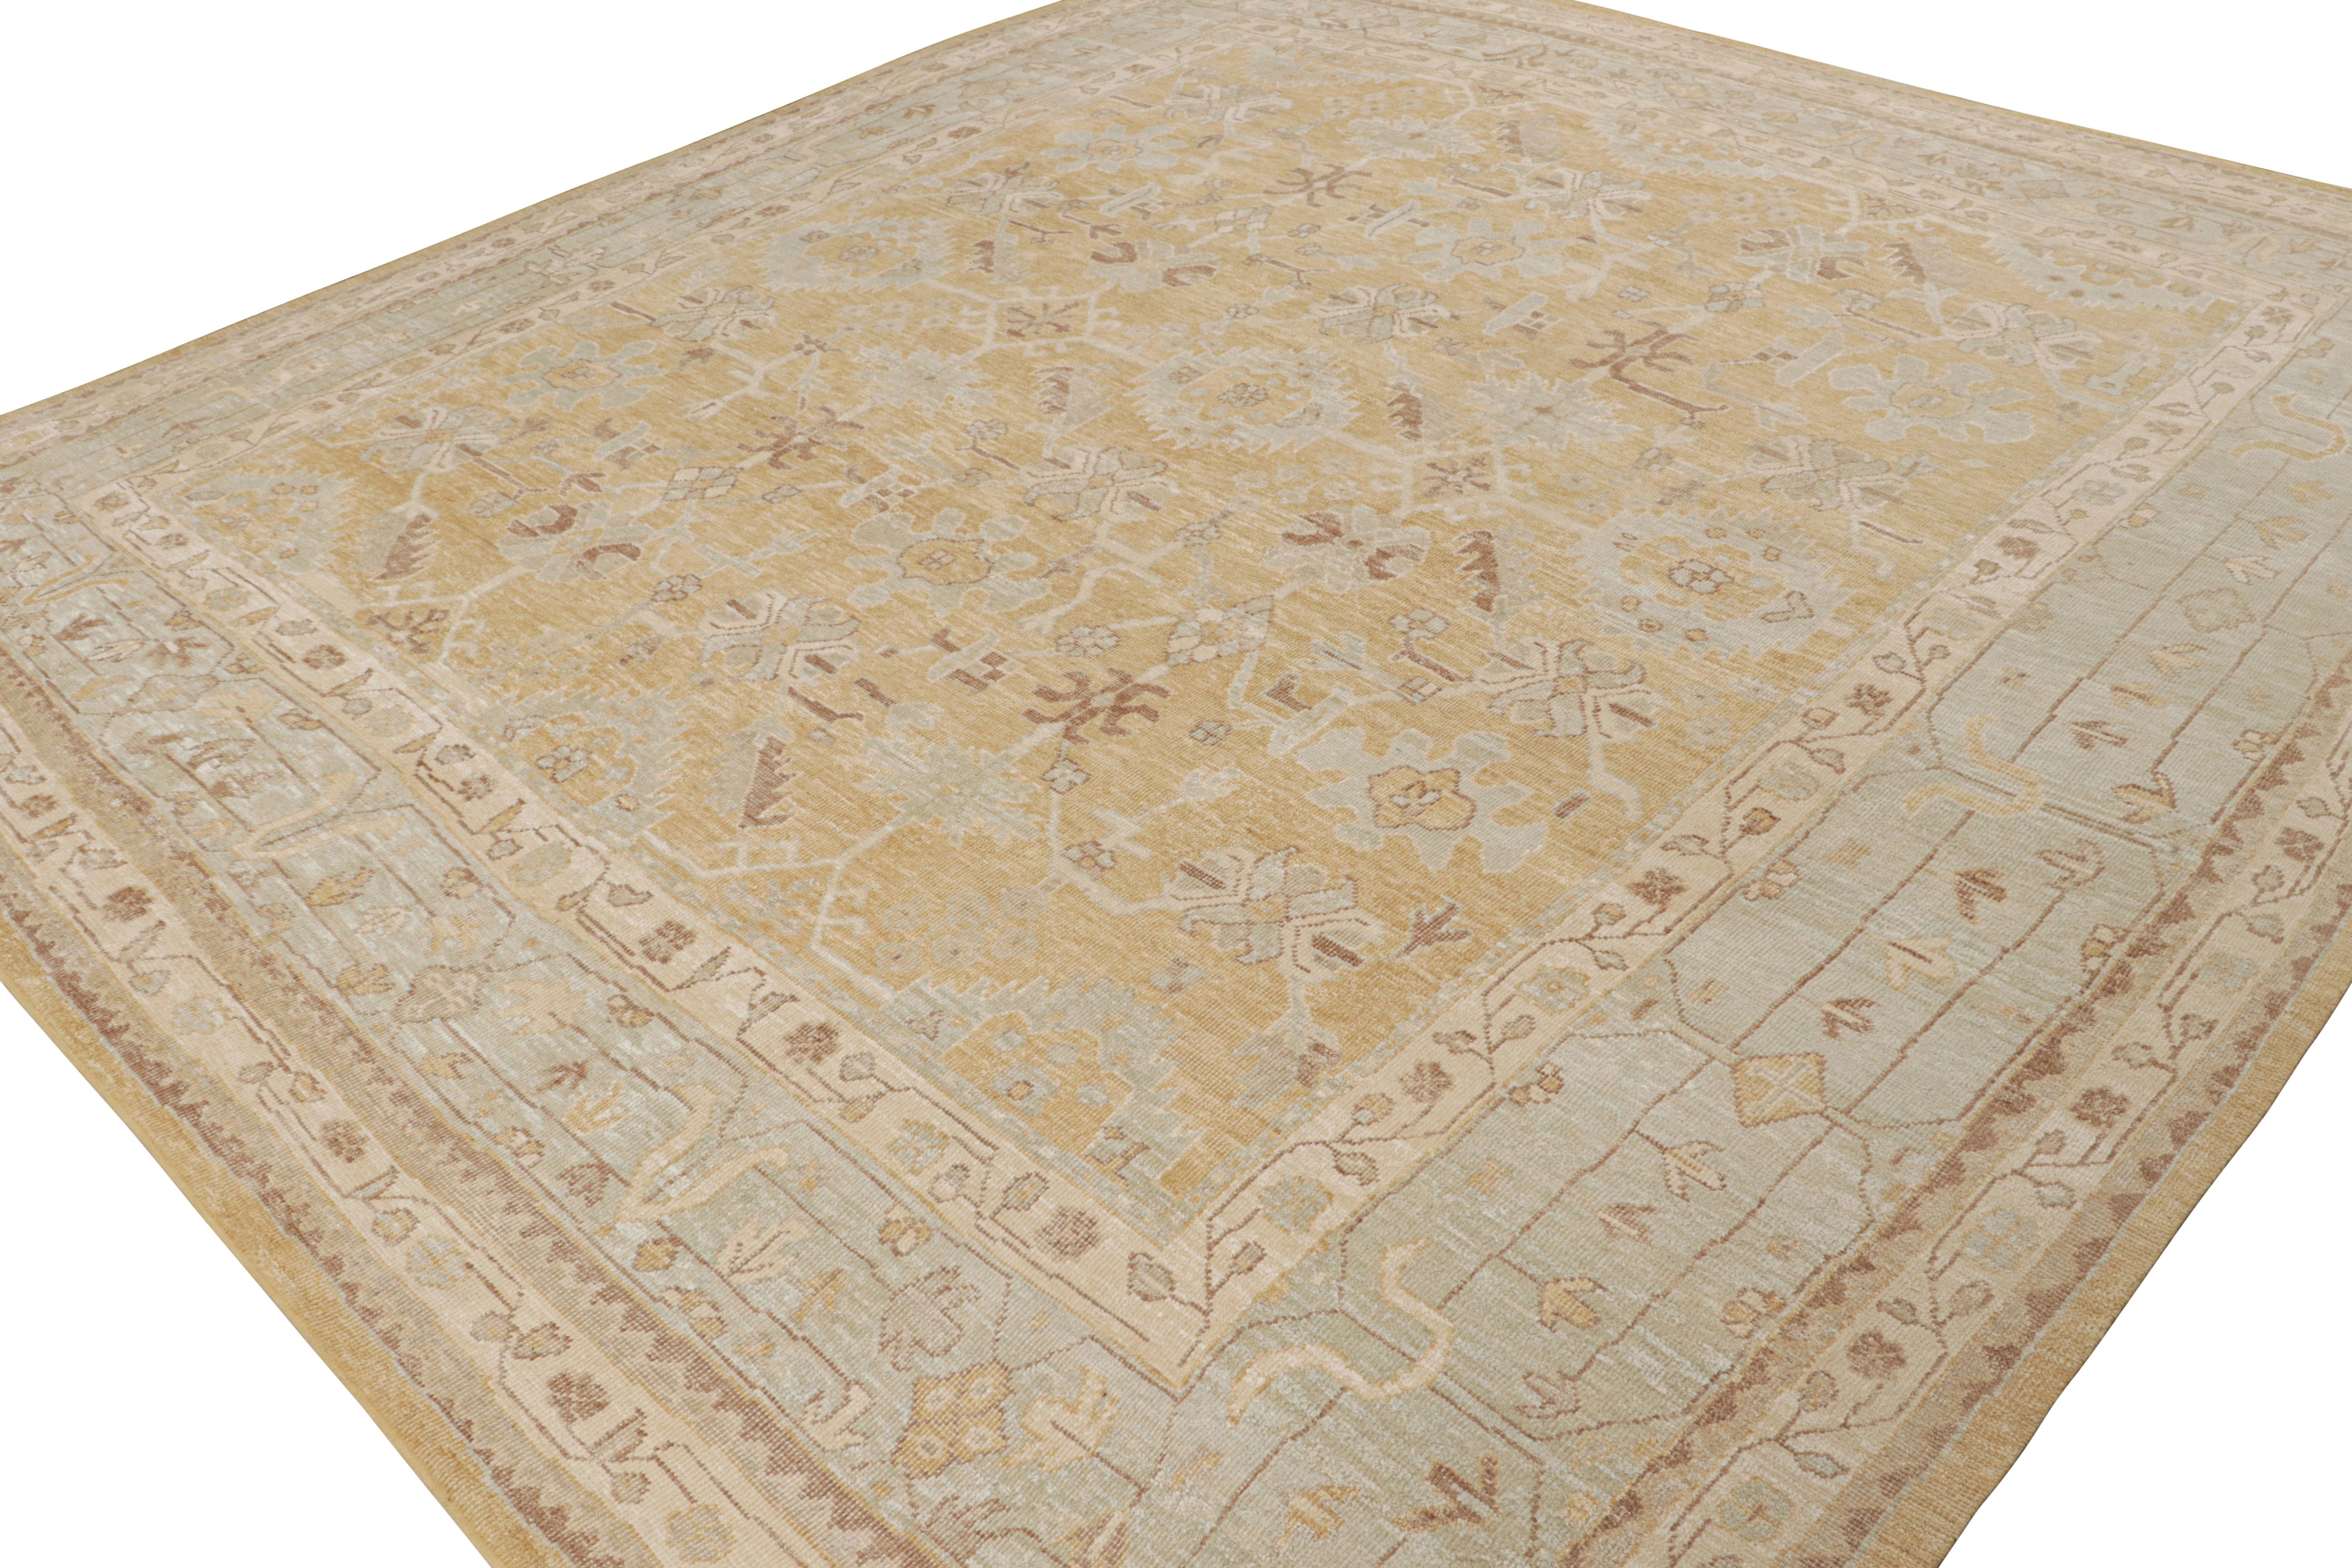 This 12x13 rug from the Modern Classics Collection features a gold field, blue and beige-brown borders underscore geometric-floral patterns keeping with the Oushak style. 

On the design: 

Connoisseurs will admire that this rug is made with a new